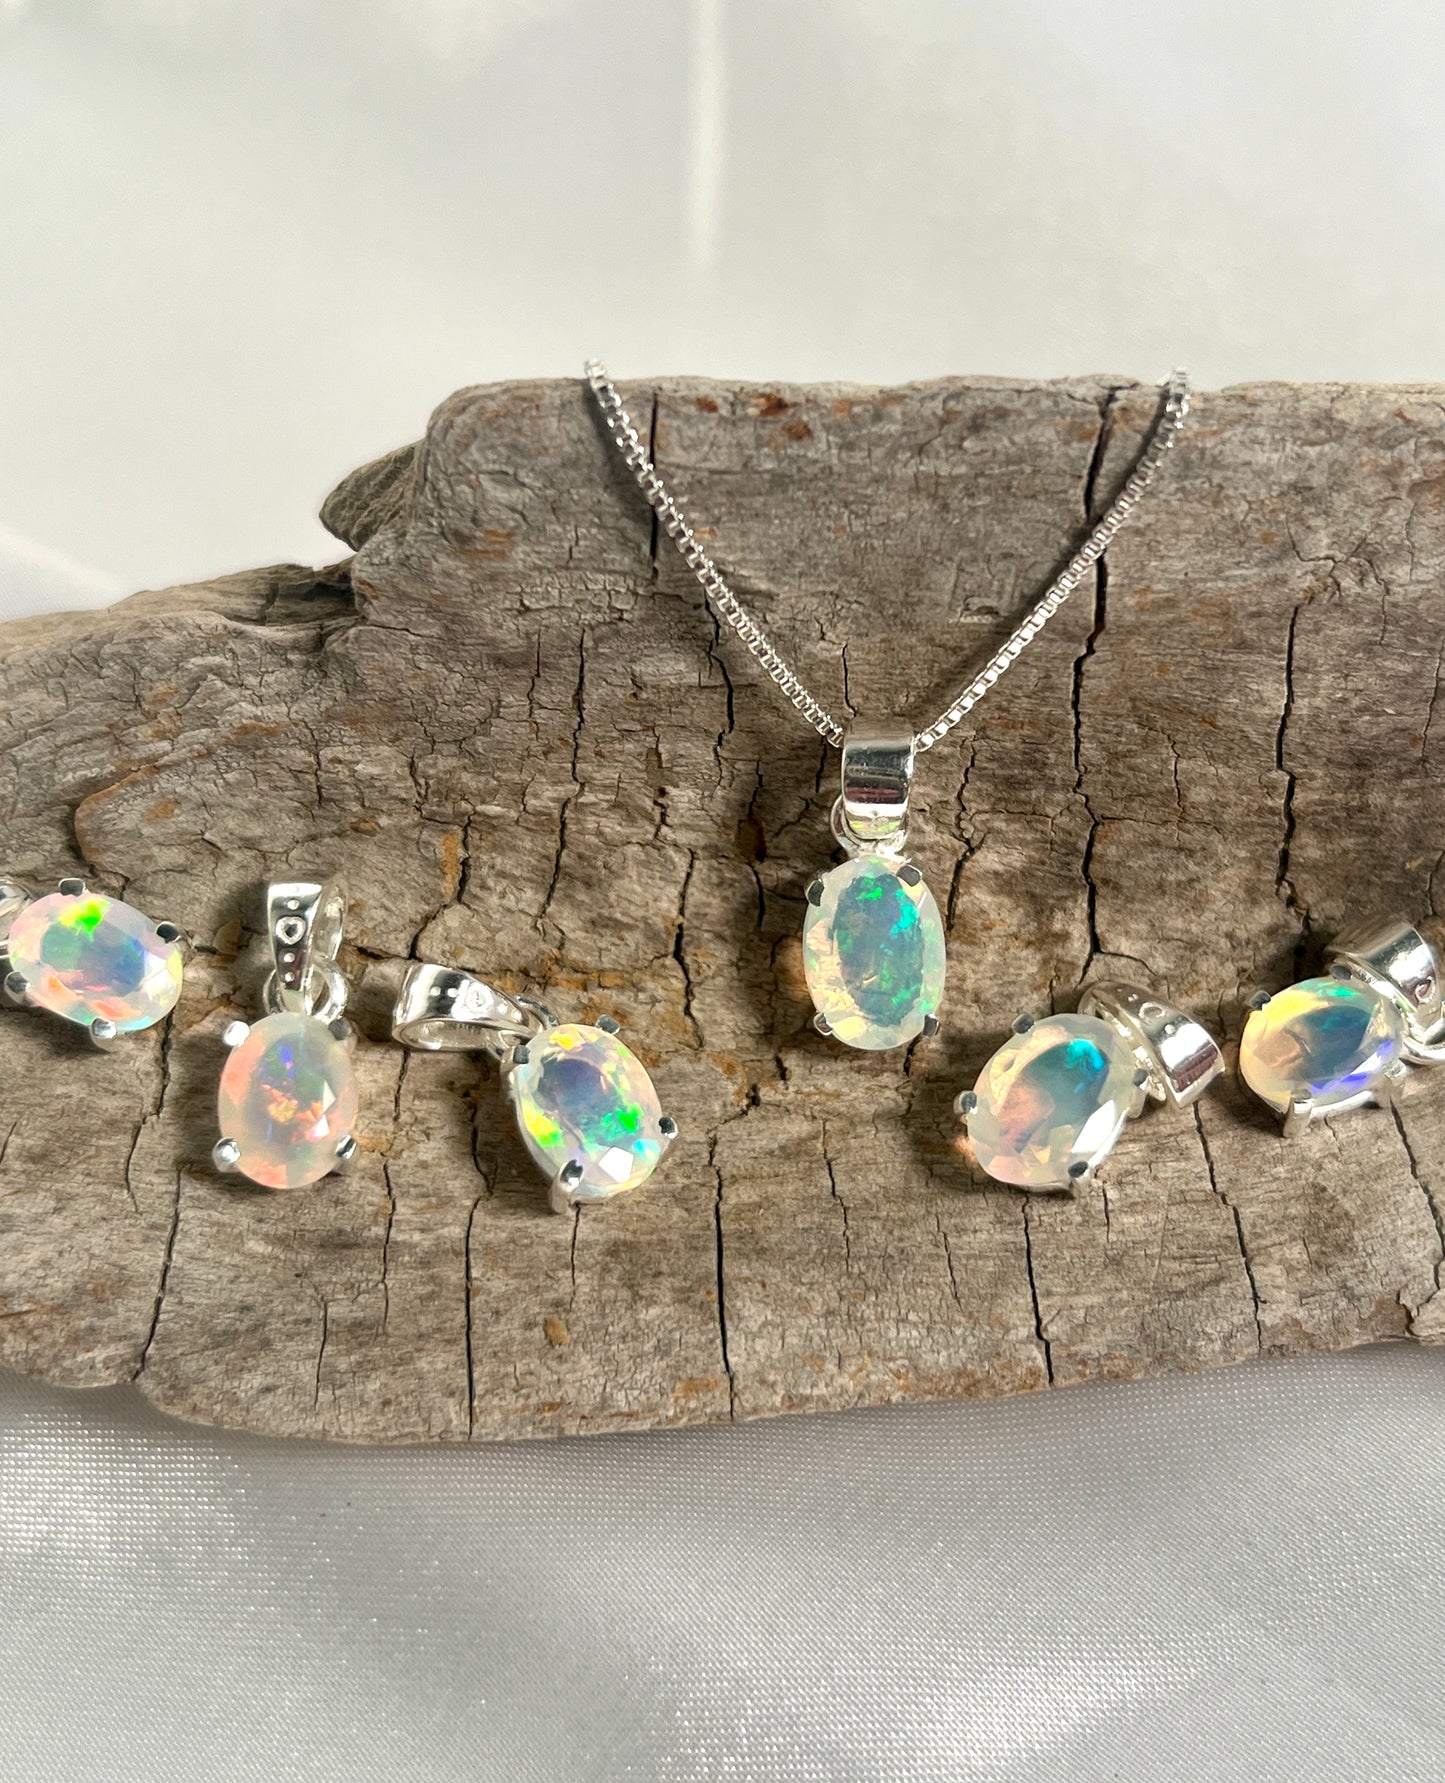 Super Silver's Tiny Facet Cut Prong Set Ethiopian Opal Pendant necklace and earrings on a piece of wood, made with .925 sterling silver.